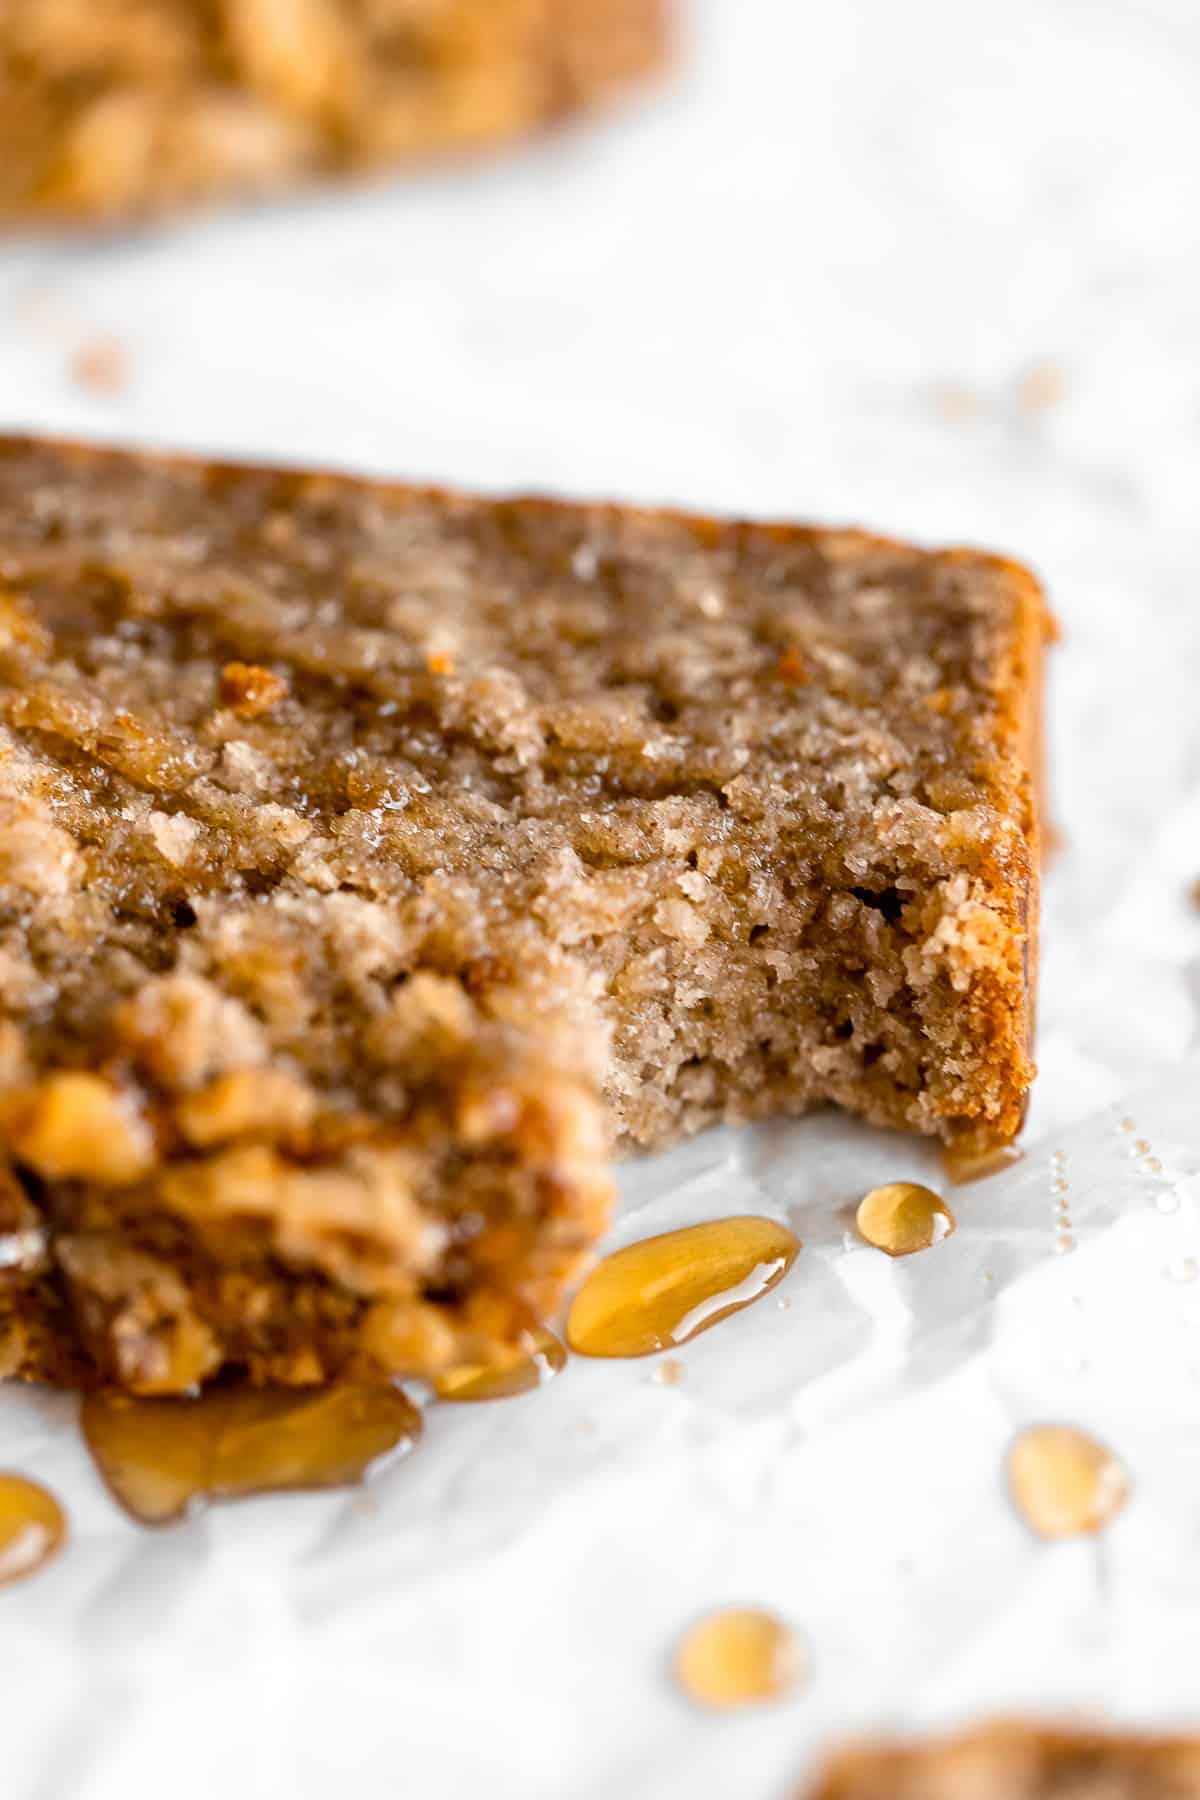 up close image of the banana bread with a bite taken out